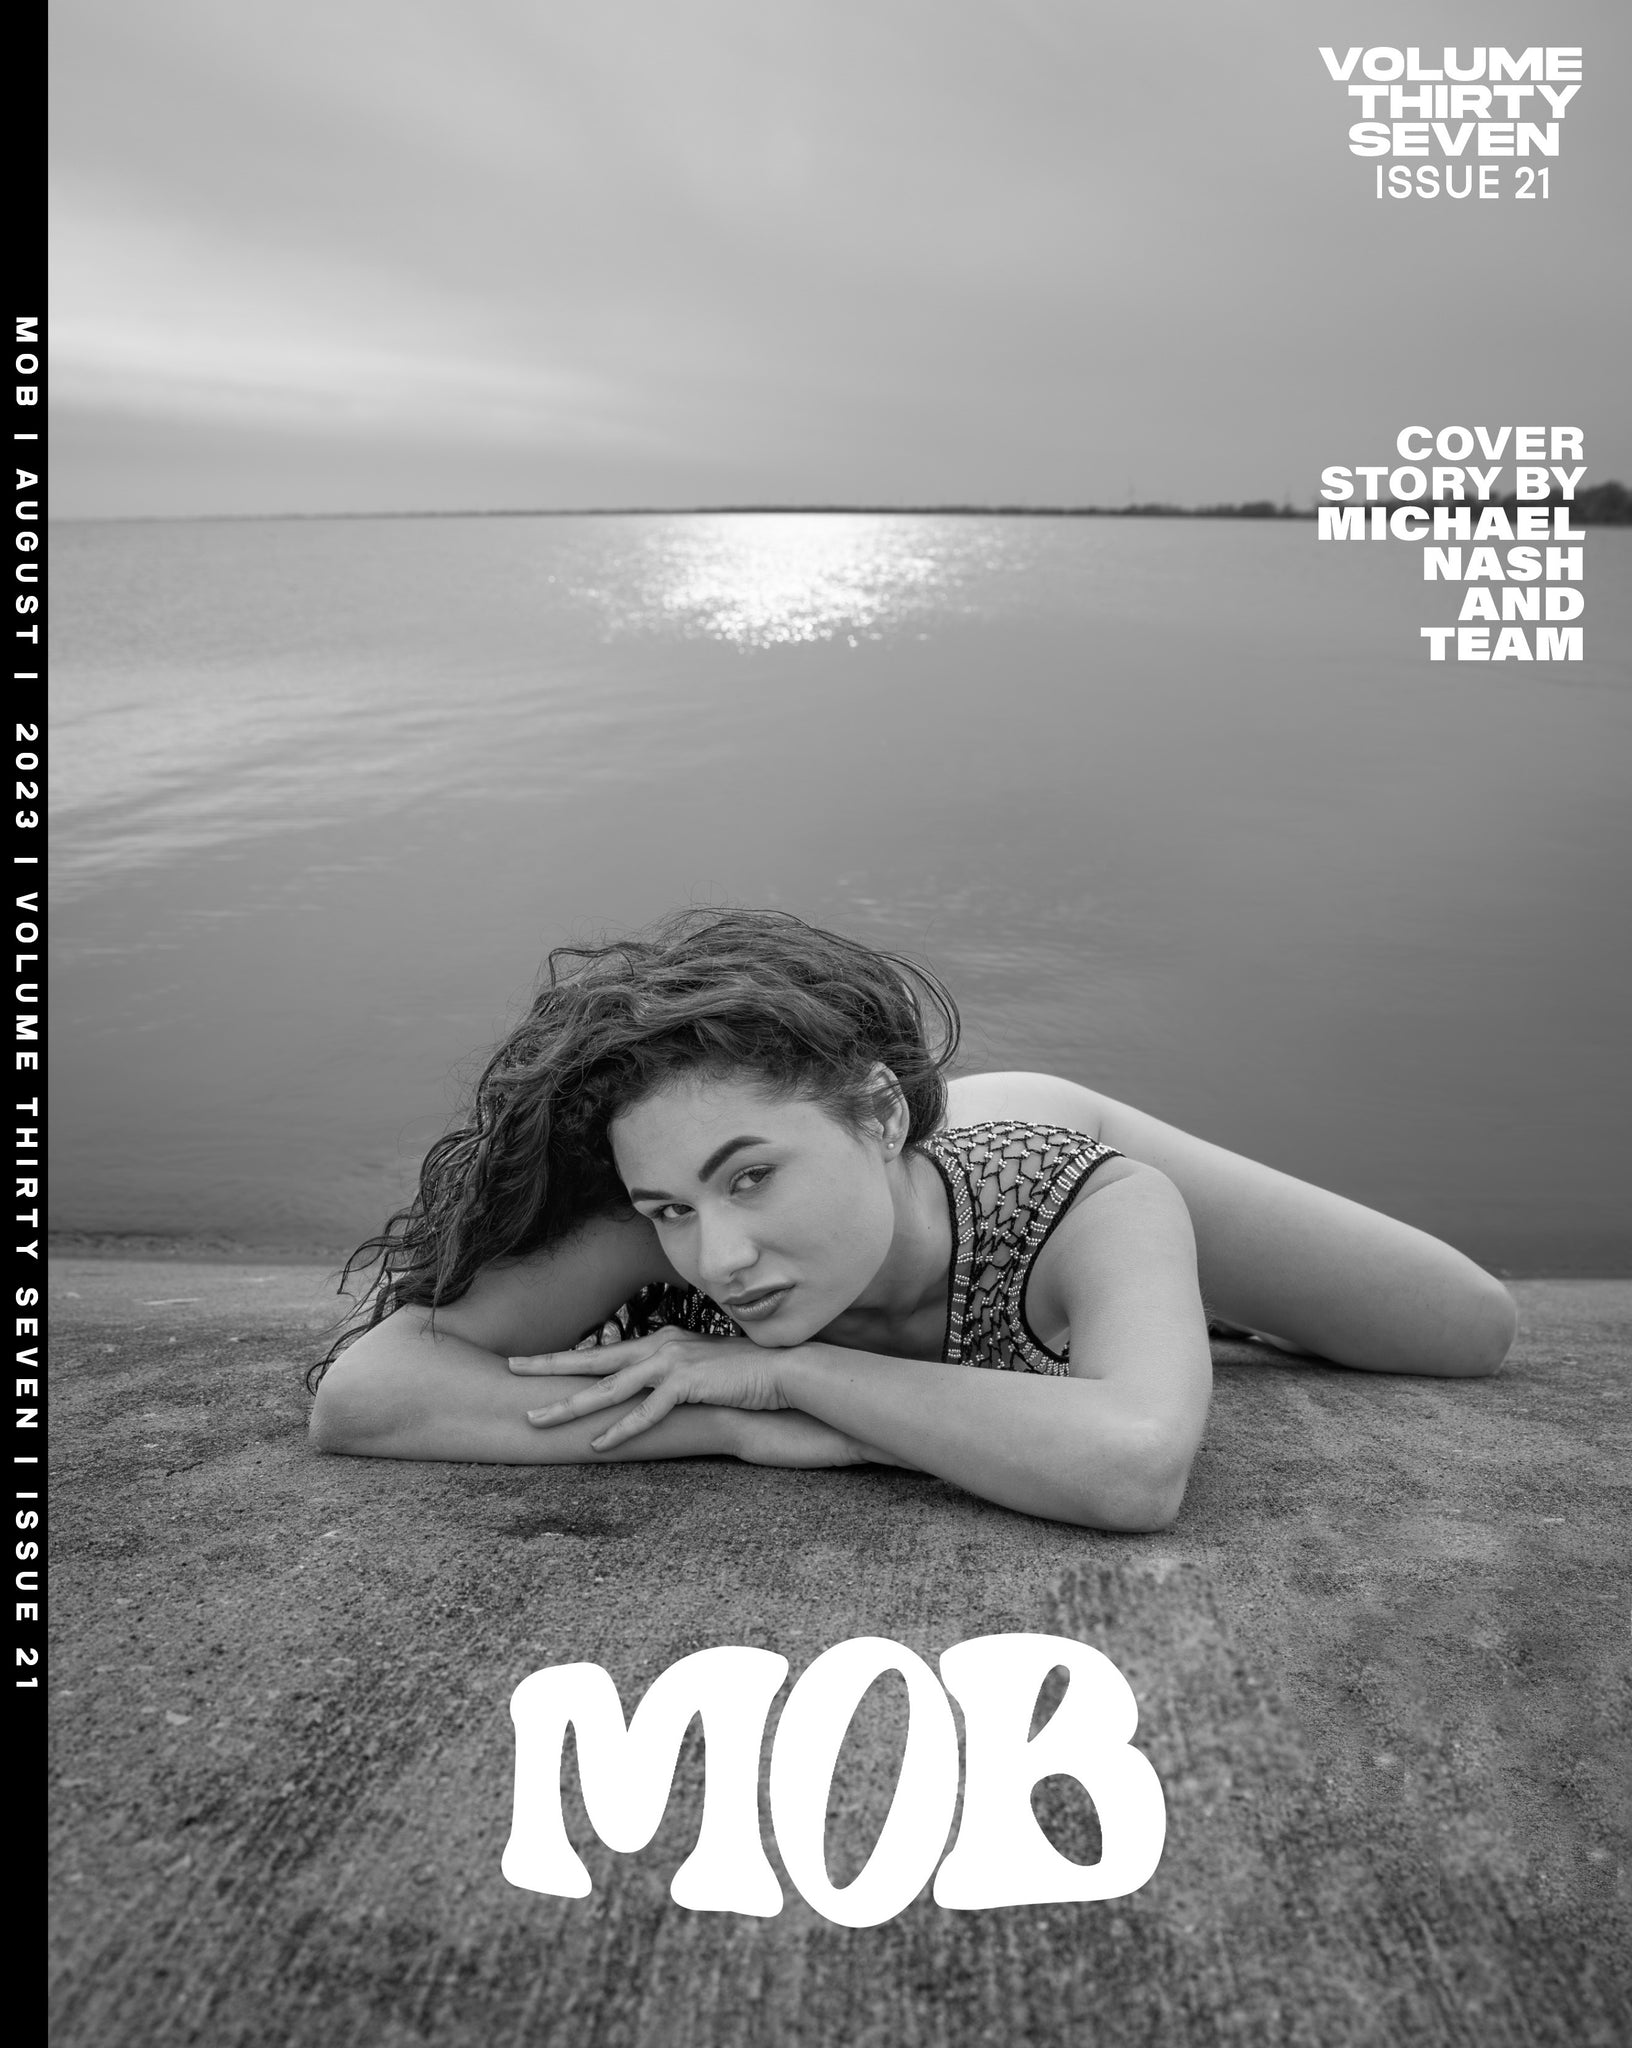 MOB JOURNAL | VOLUME THIRTY SEVEN | ISSUE #21